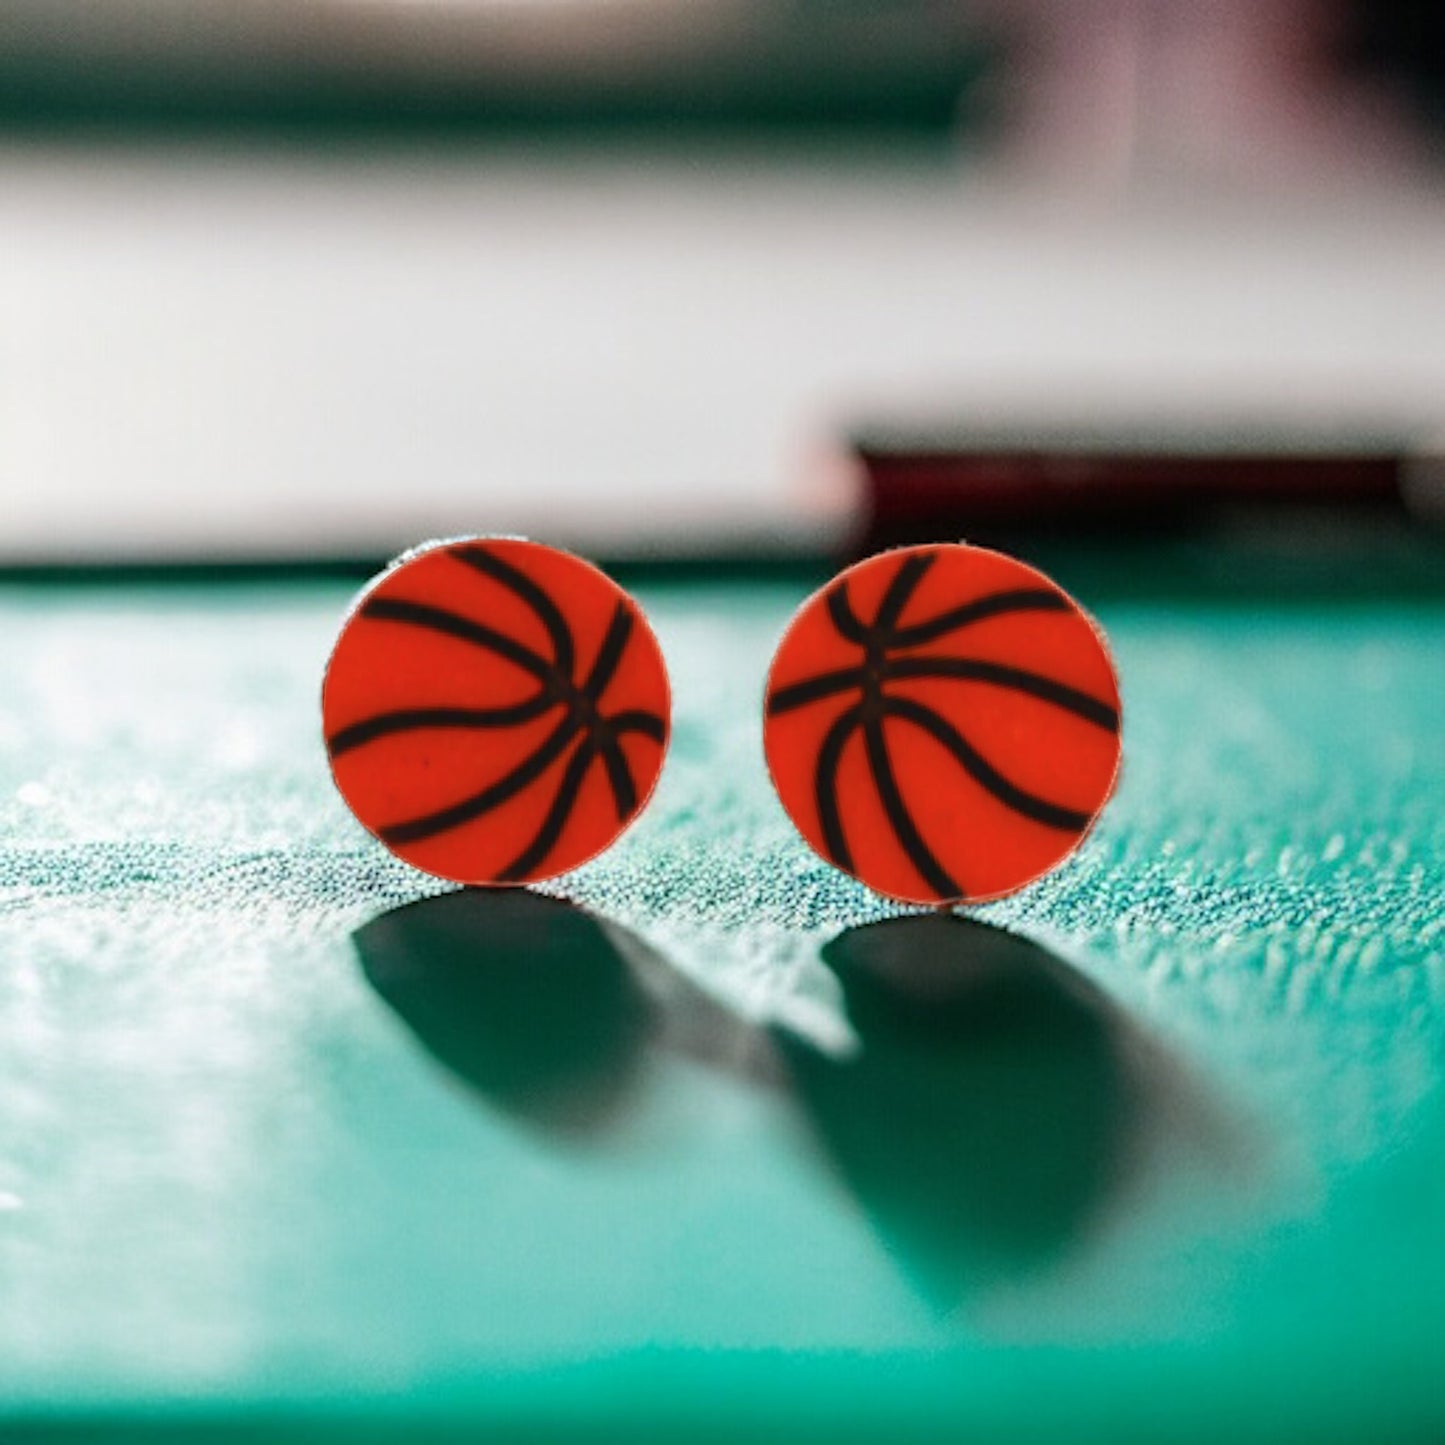 Tiny Sports Equipment Button Stud Earrings